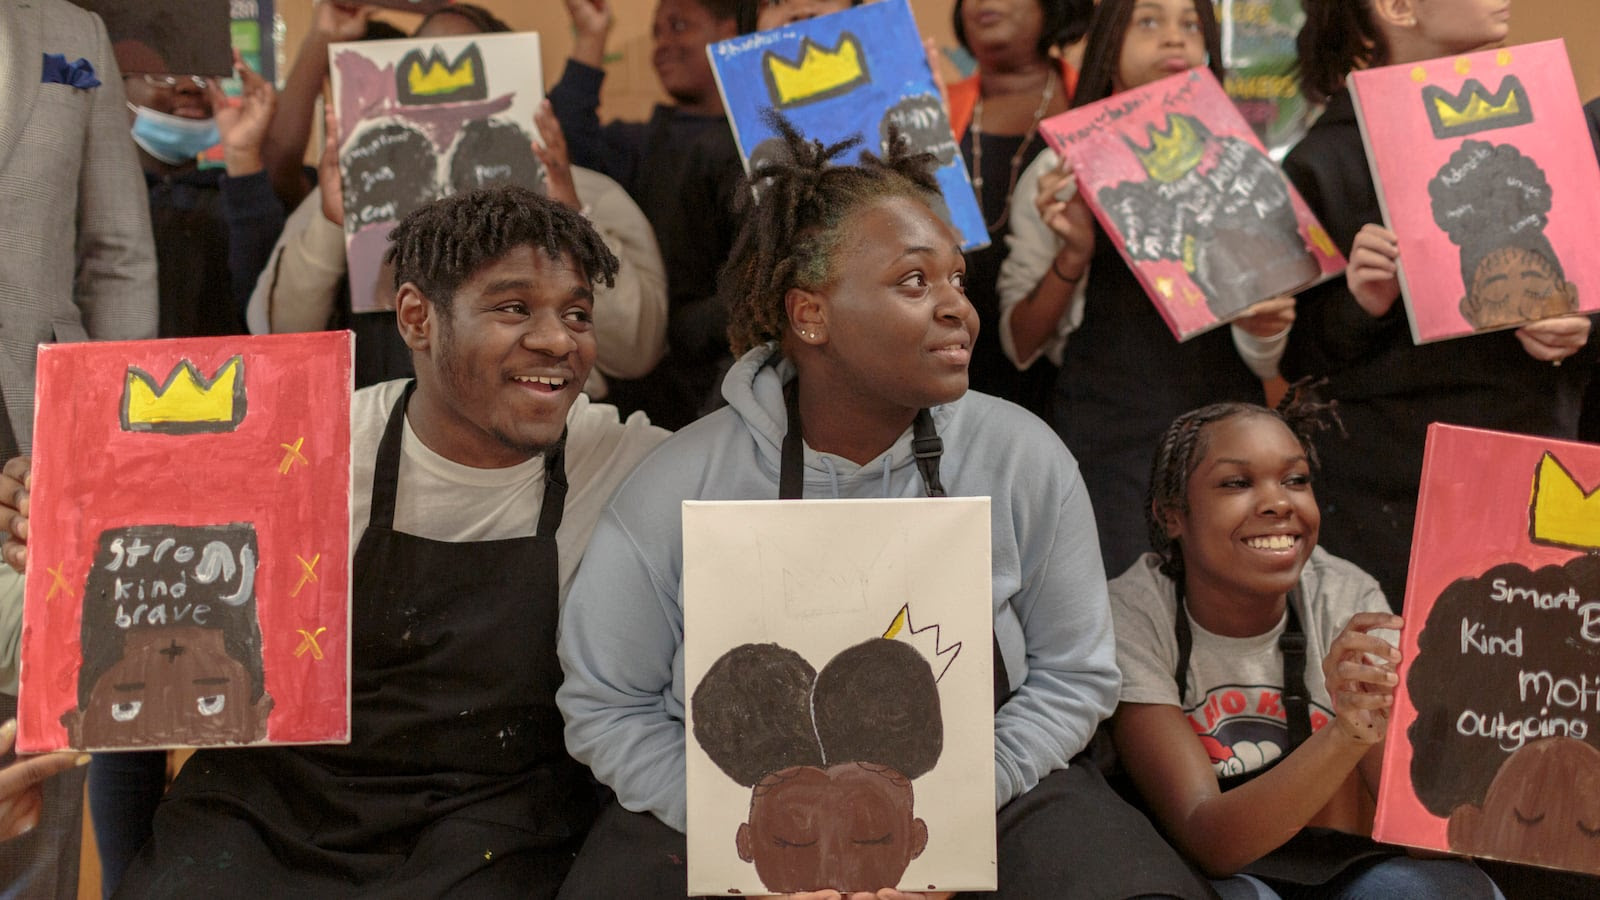 Several students wearing black smocks smile and hold up artwork featuring yellow crowns.